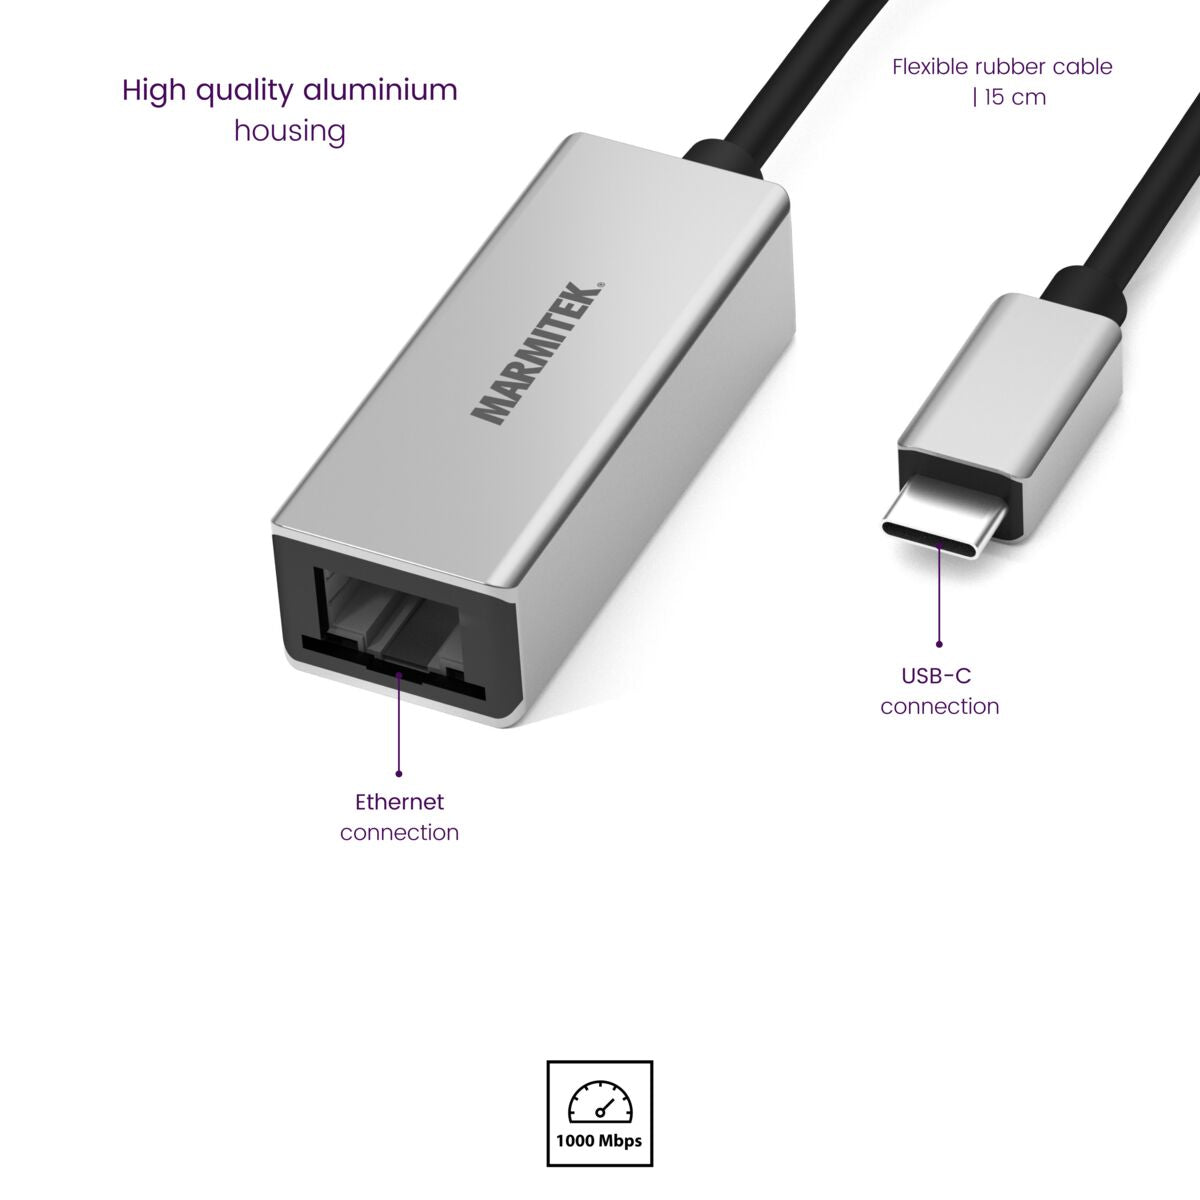 Connect USB C > Ethernet - USB-C to Ethernet adapter